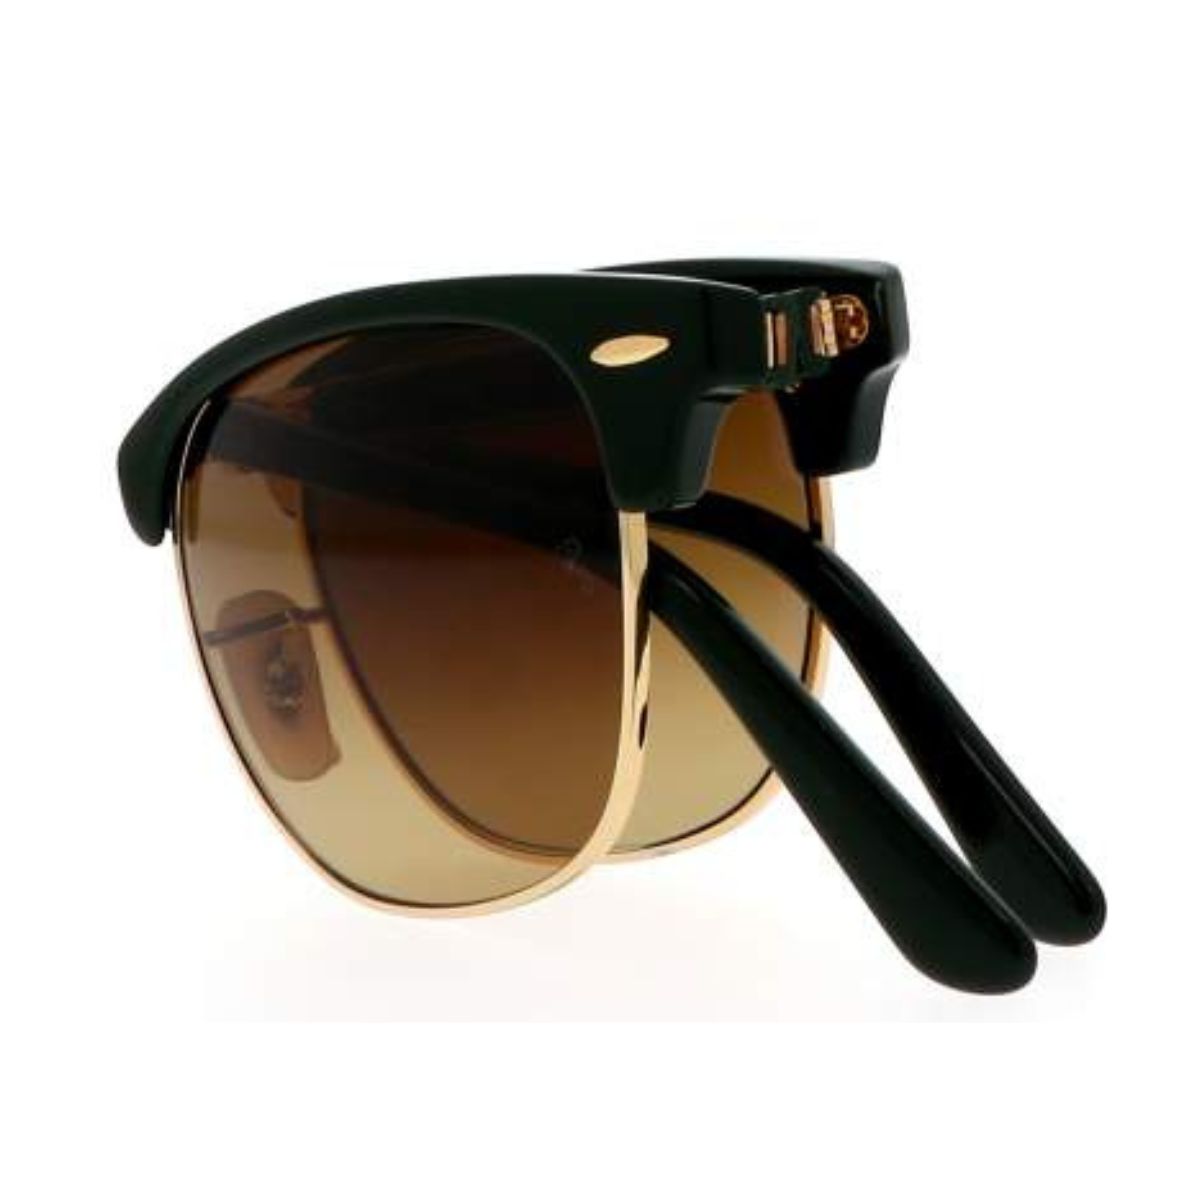 "Ray Ban 2176 1368/85 UV Protection Stylish Sunglasses For Men And Women At Optorium"